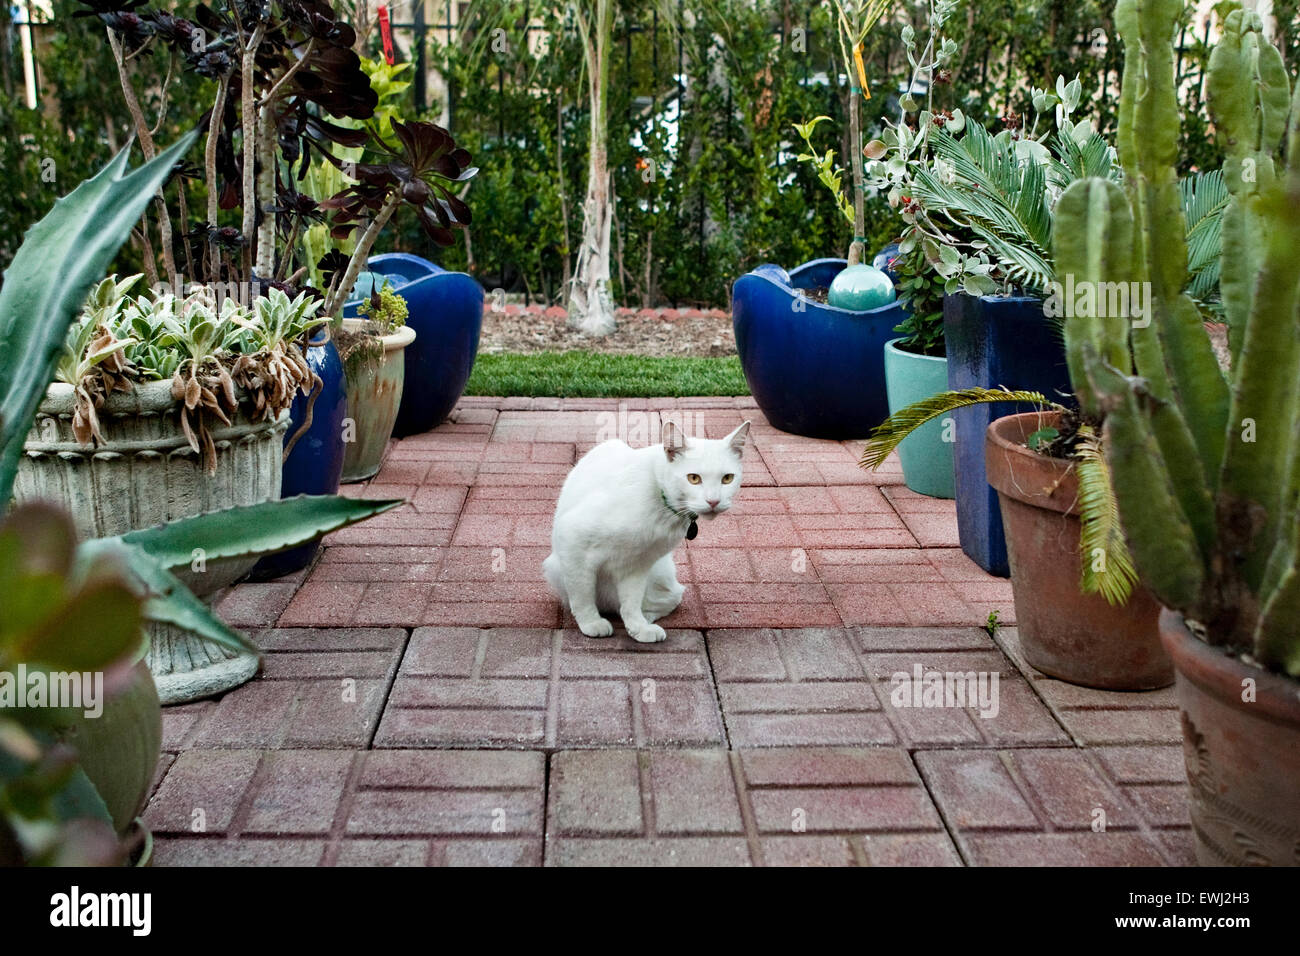 Sitting white cat on brick patio surrounded by potted plants in backyard of home Stock Photo